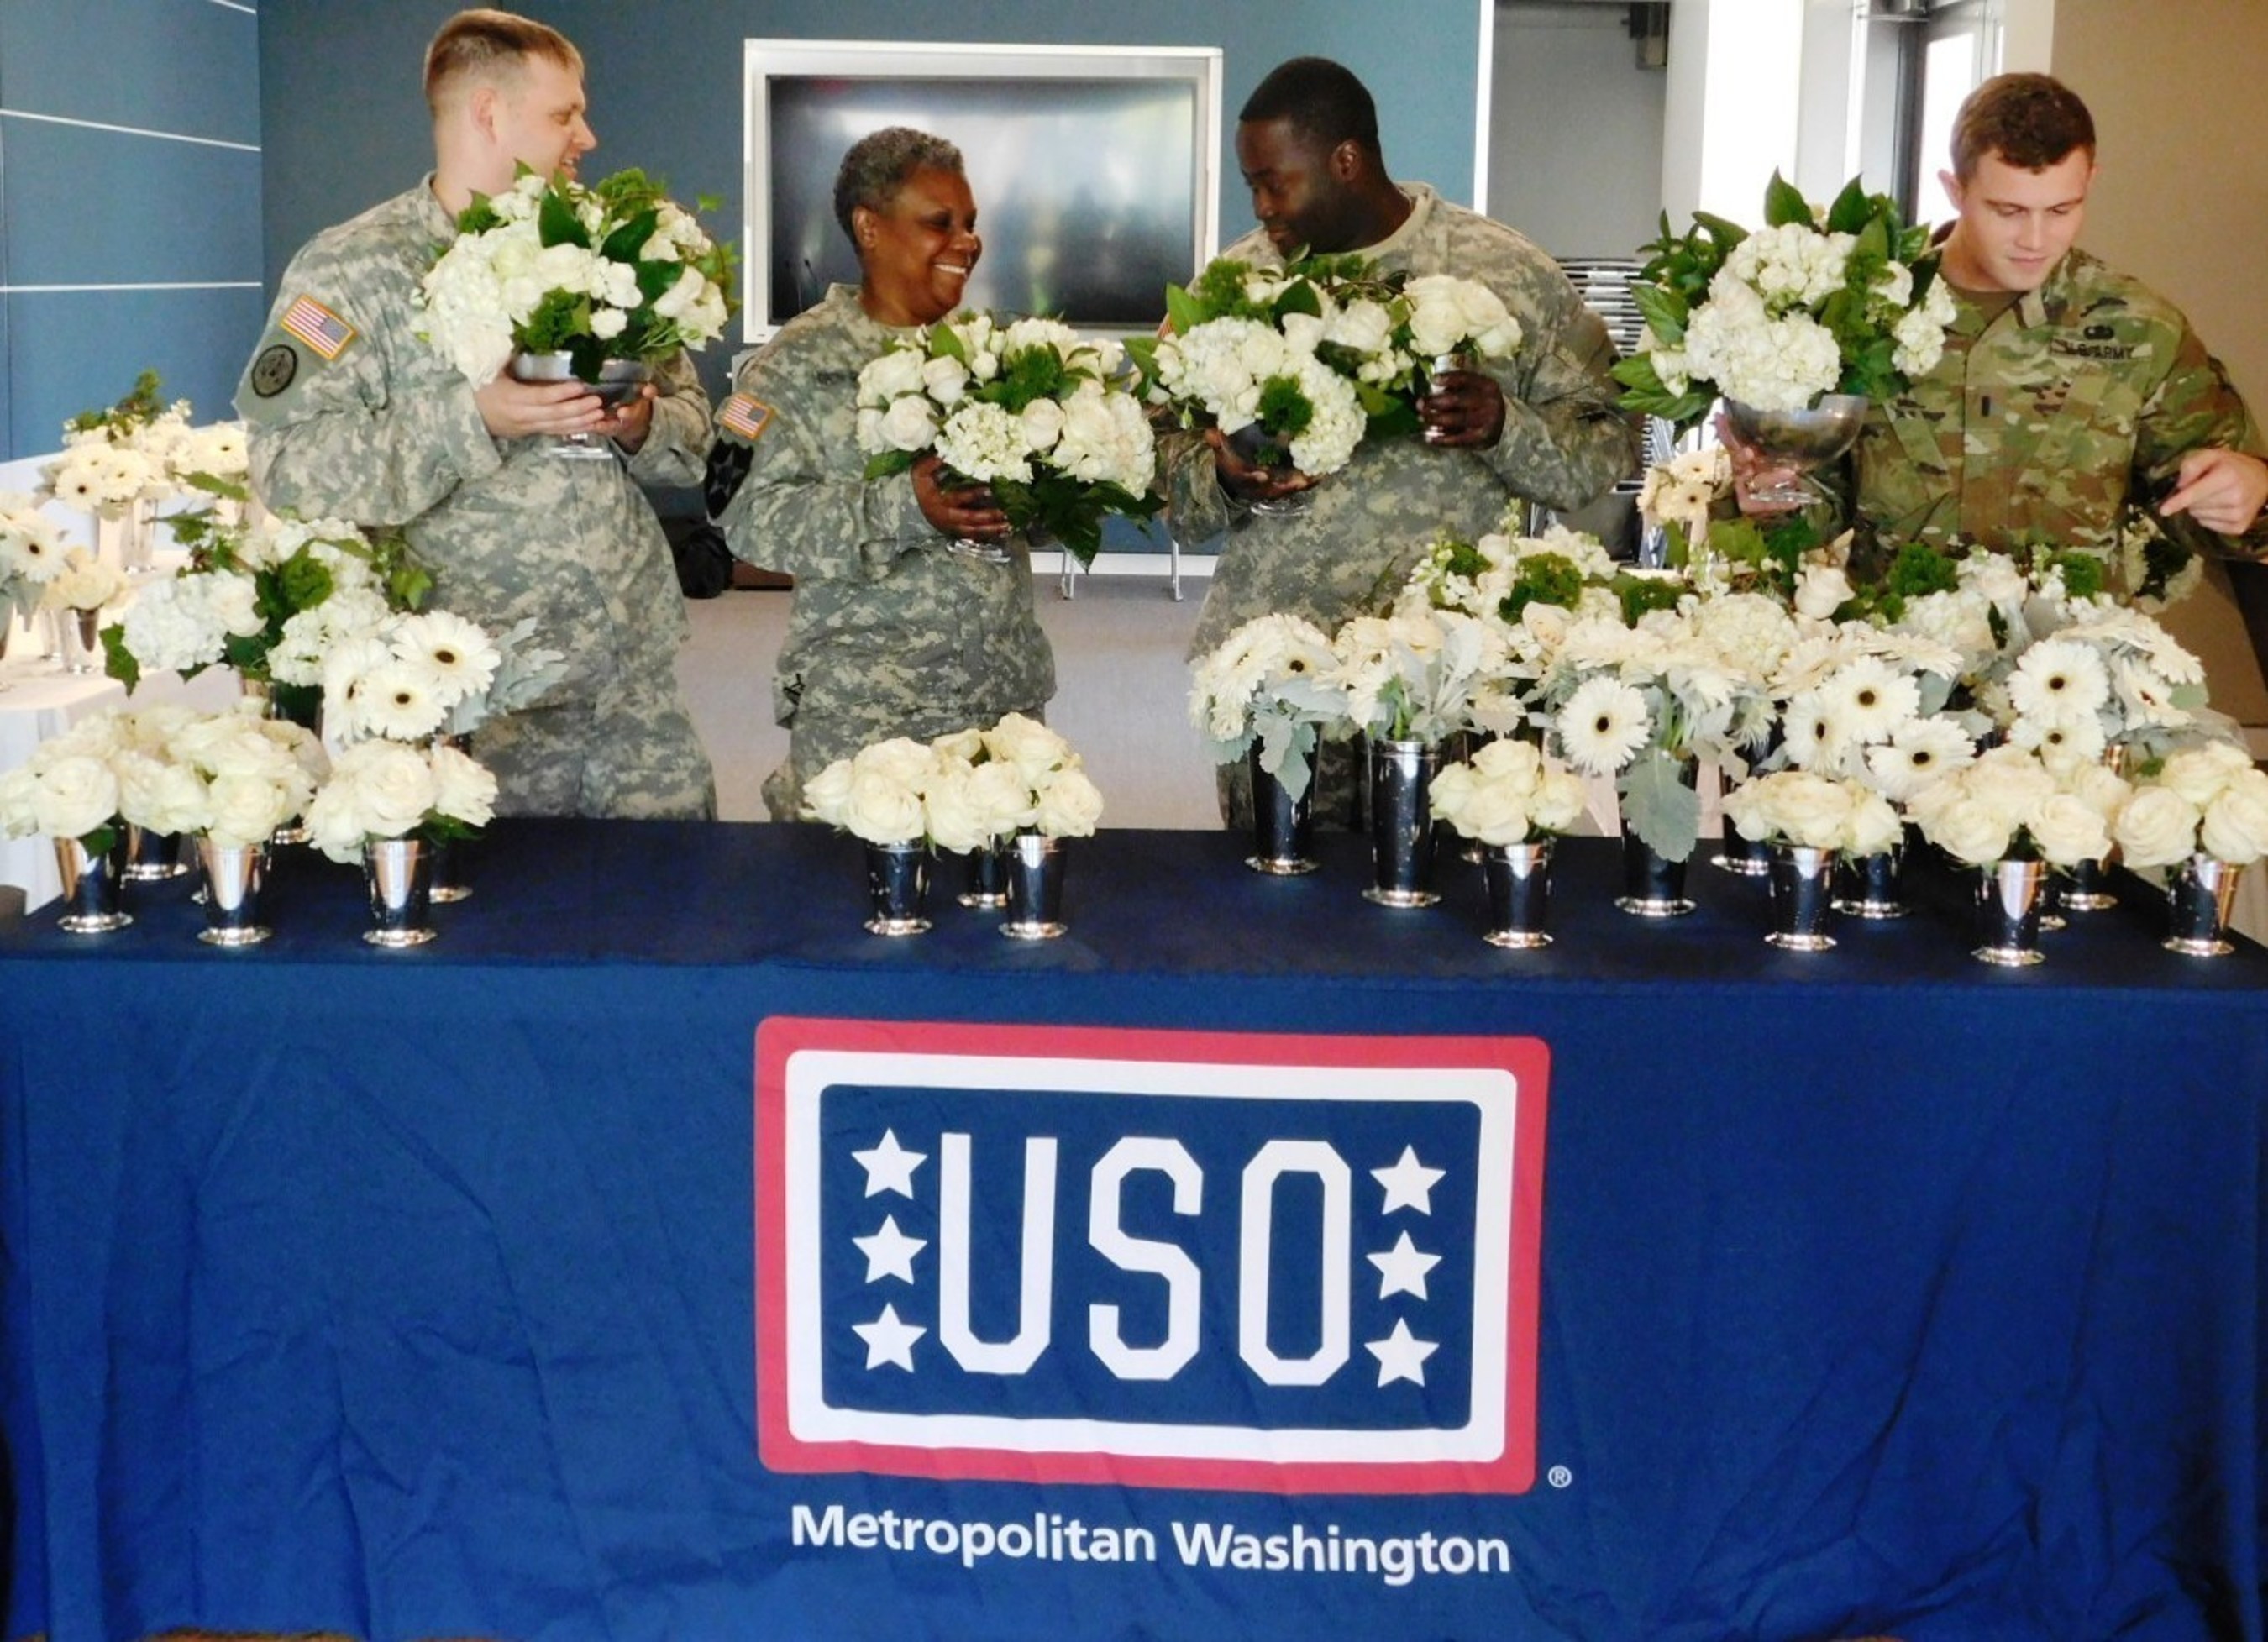 Fresh artisan-designed flowers from premier floral and gifting company FTD help bring a smile to active duty soldiers and their loved ones Wednesday, Oct. 21 at the USO Warrior and Family Center at Bethesda.  FTD honors military service members as part of an ongoing USO campaign encompassing a number of components, including sponsorship of the USO Gala held Oct. 20 and a dedicated USO Collection of bouquets.